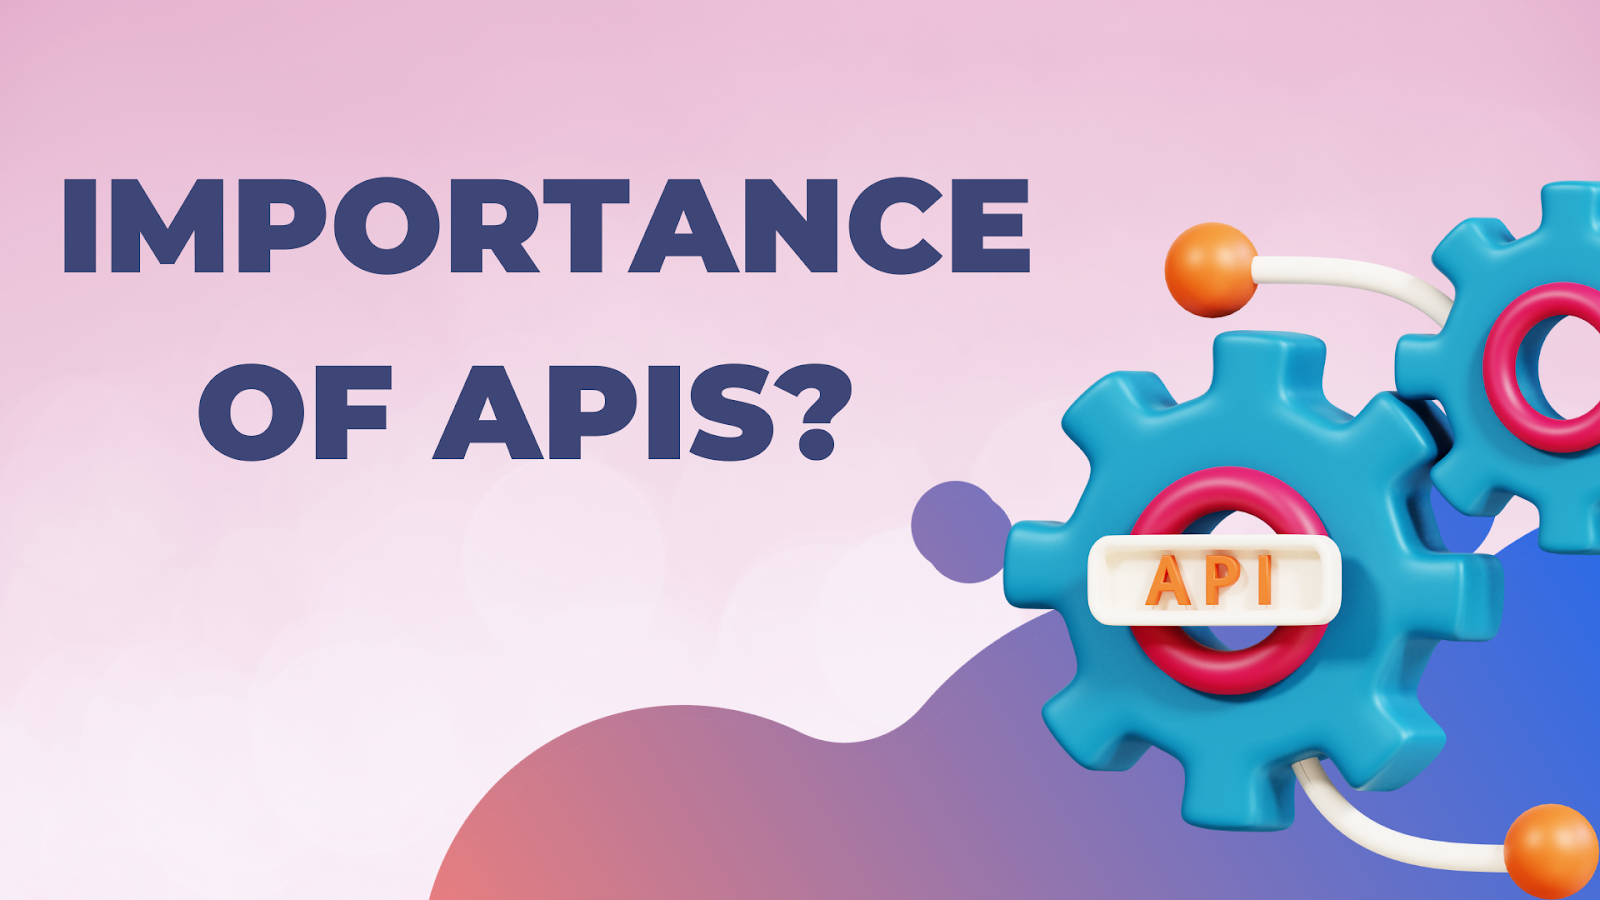 WHAT ARE APIs?

